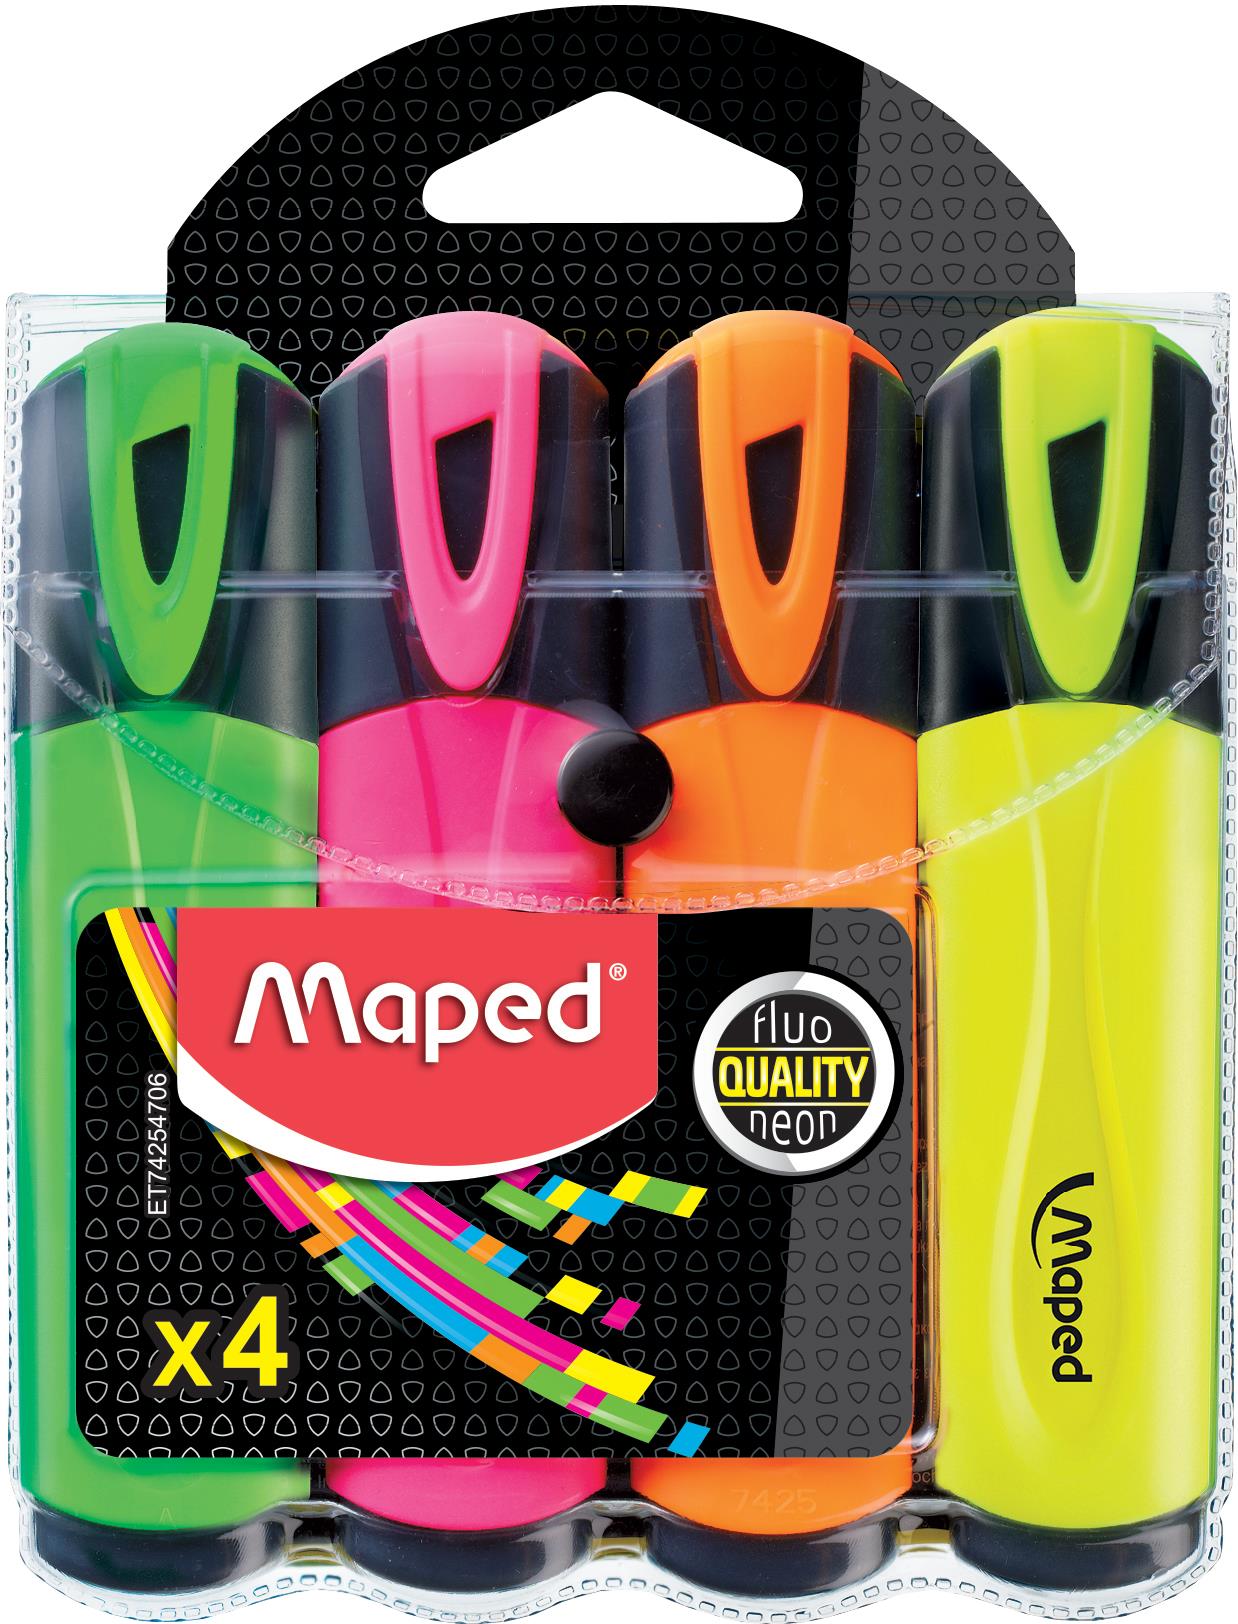 Maped Fluo Pep S